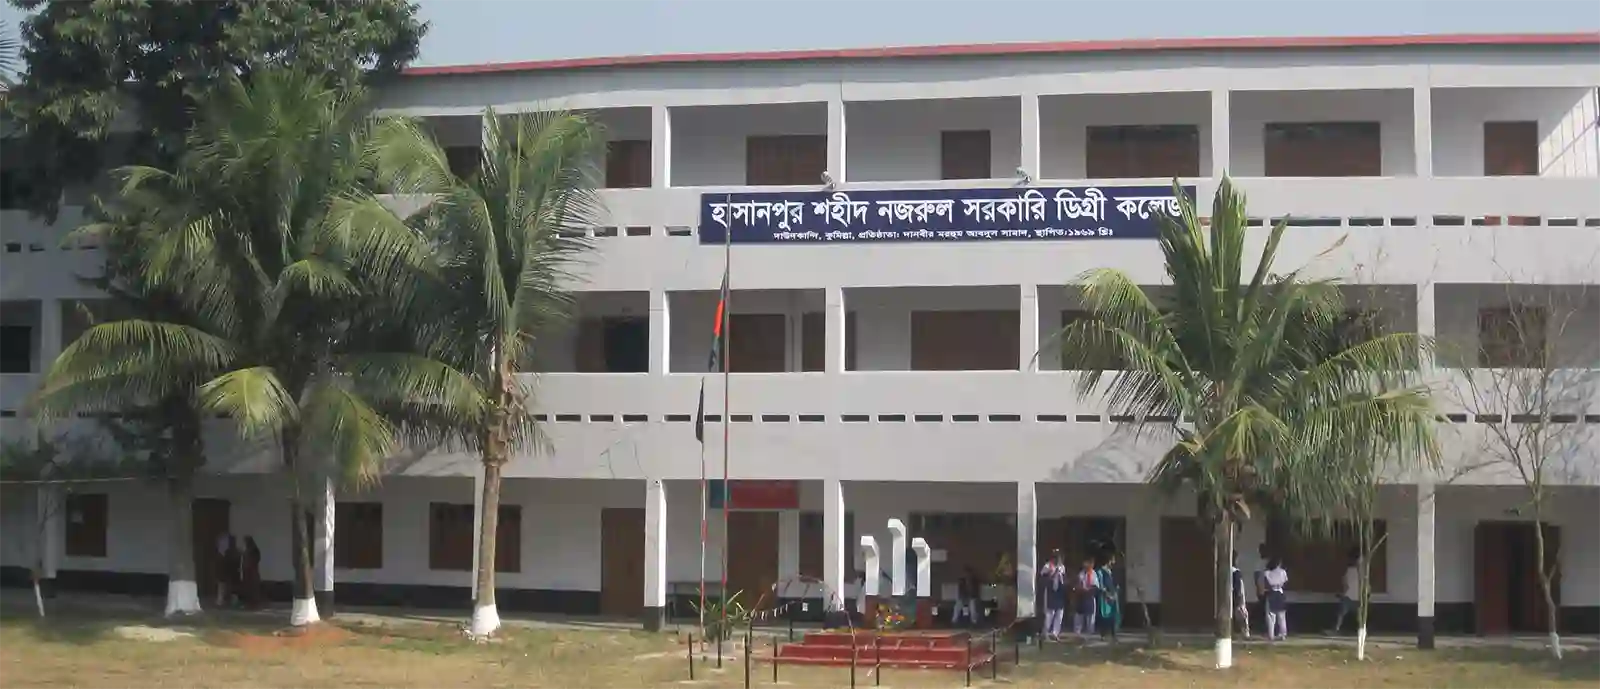 About Hasanpur Shahid Nazrul Government College